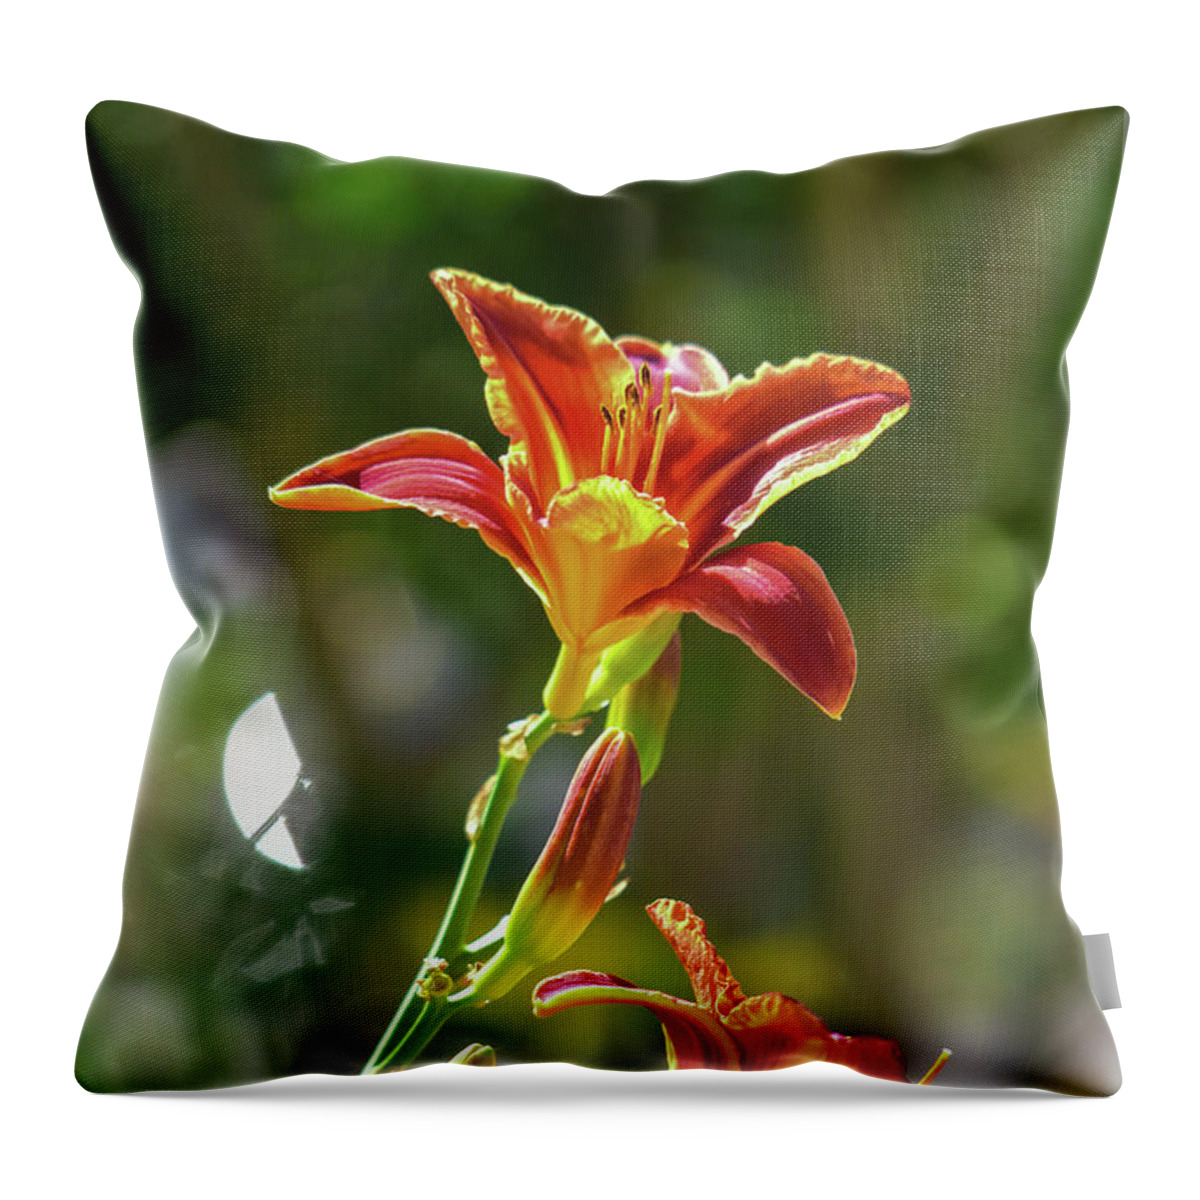 Linda Brody Throw Pillow featuring the photograph Red Orange Day Lilies I by Linda Brody